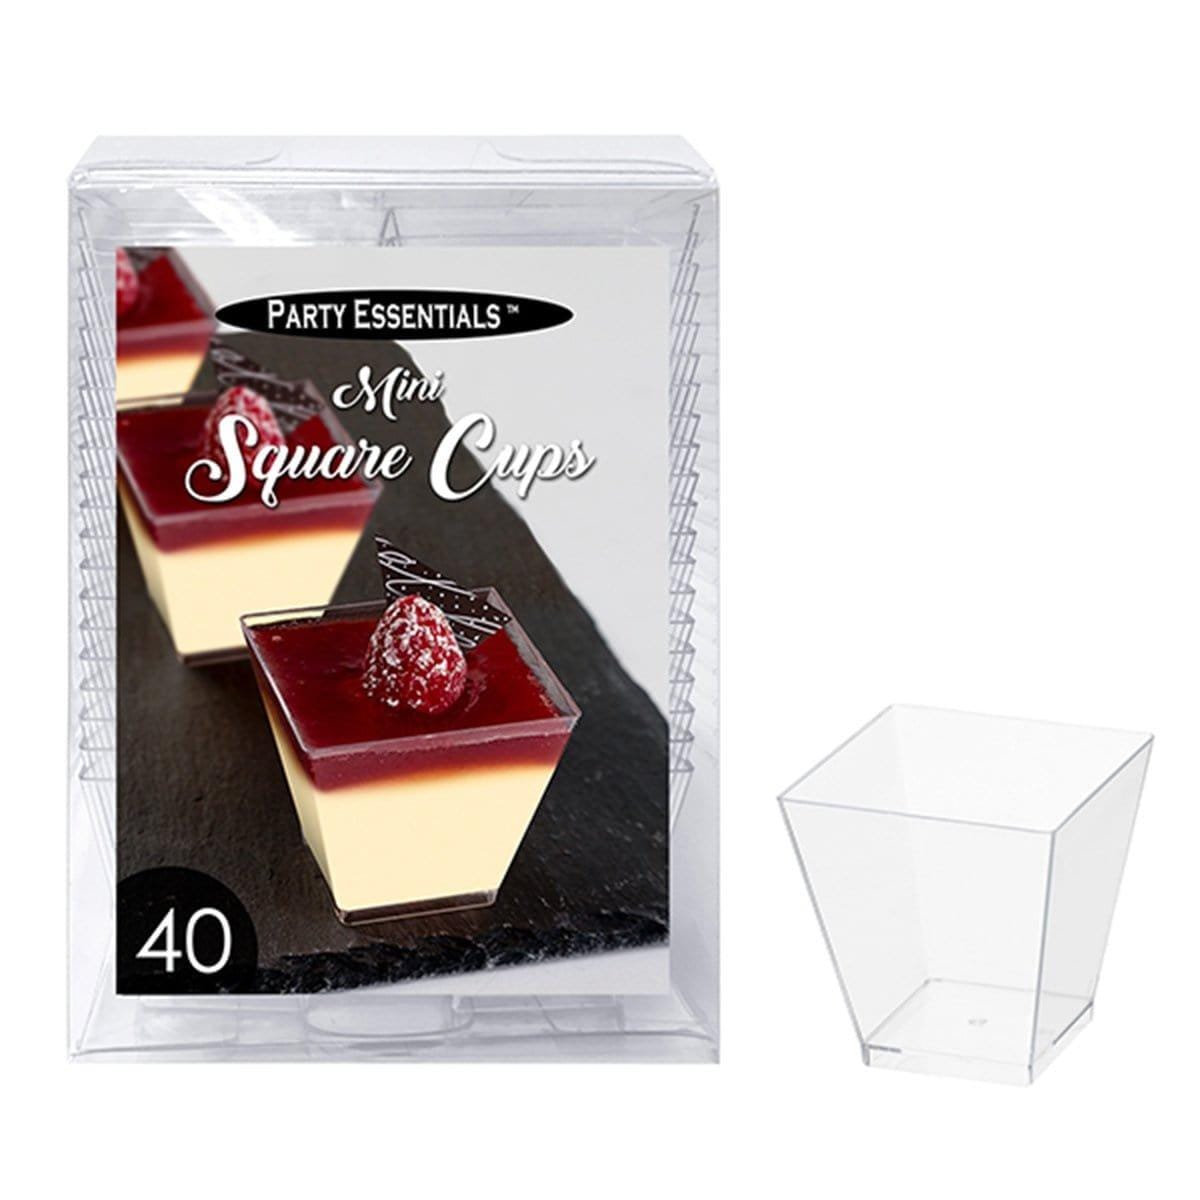 Buy Plasticware Mini Square Cups 2 Oz., 40 Count sold at Party Expert